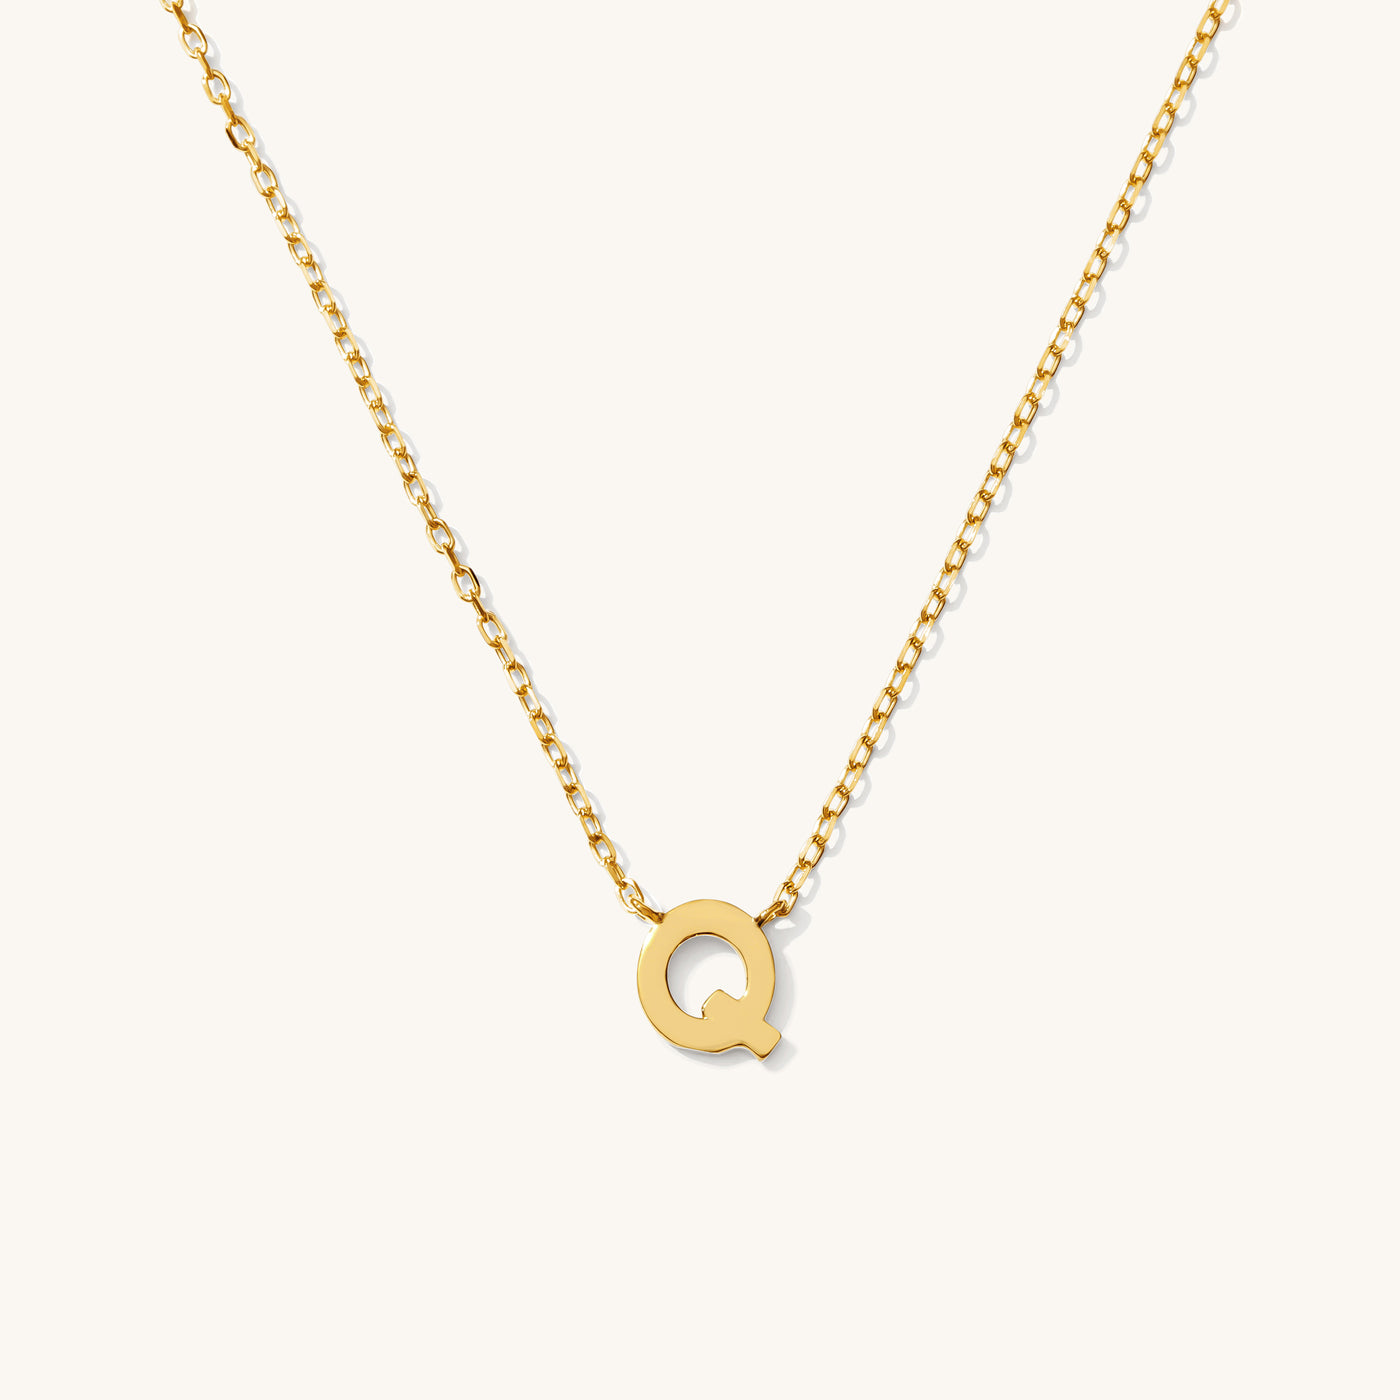 Q Tiny Initial Necklace - 14k Solid Gold